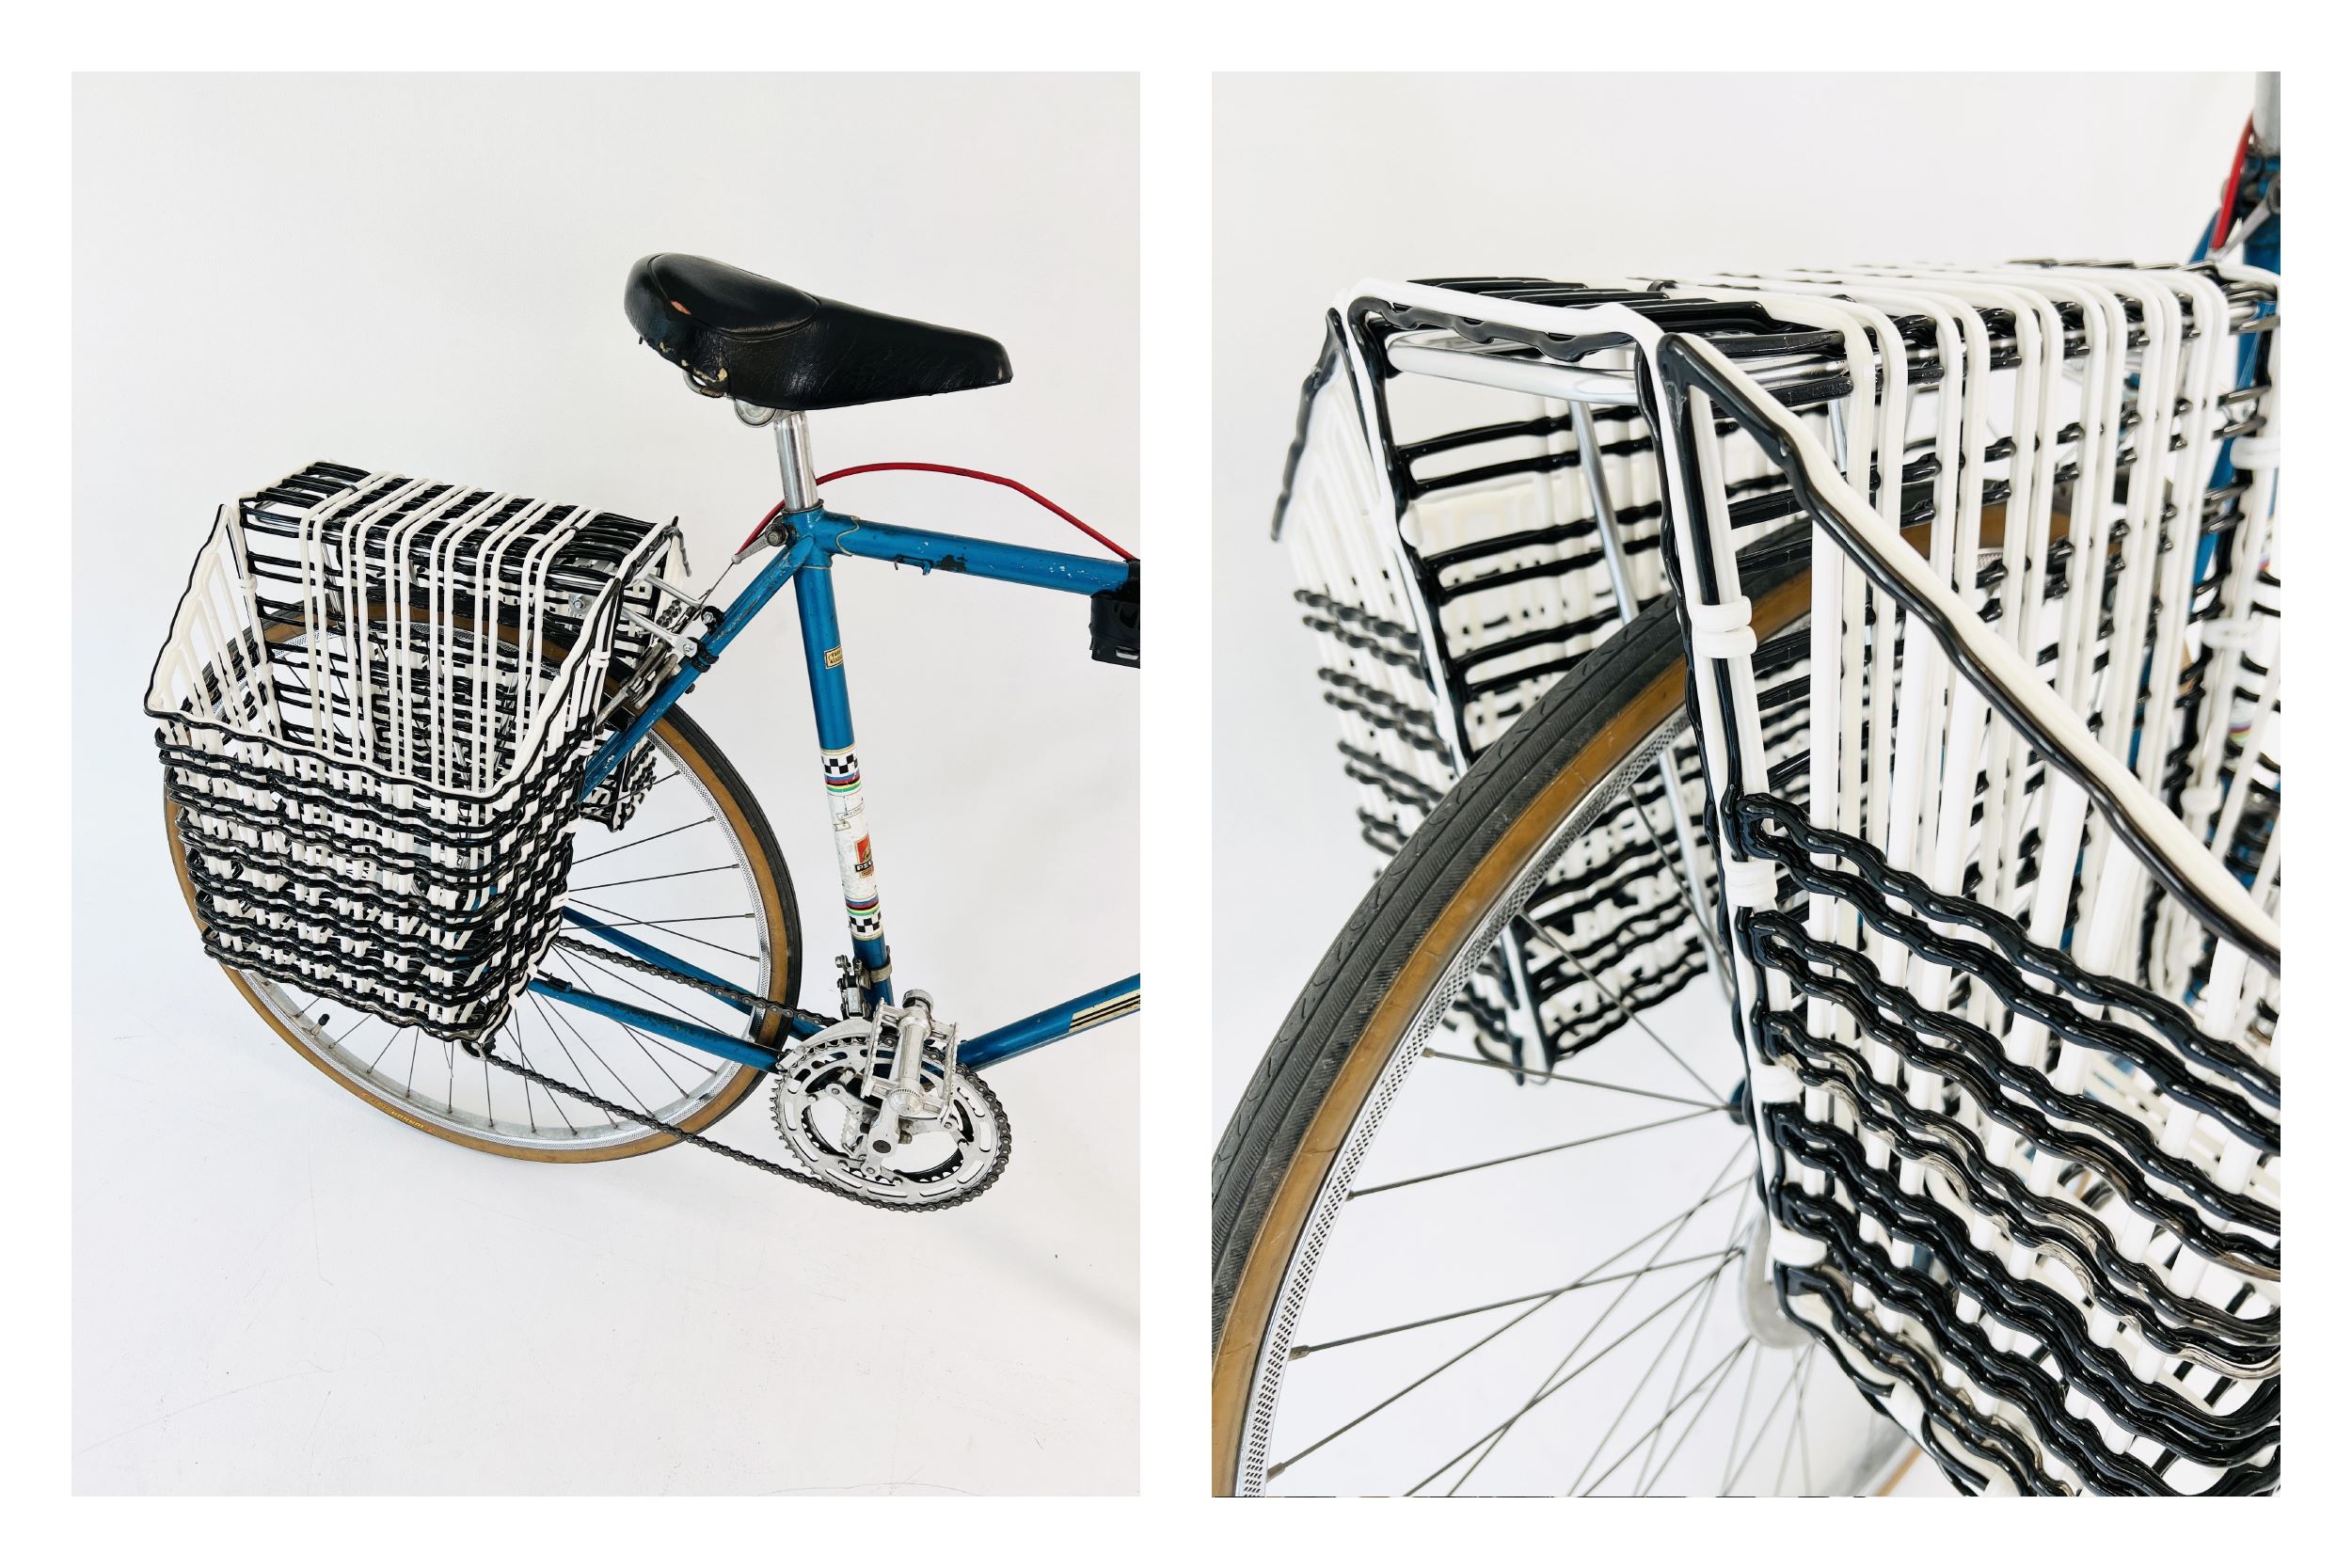 Black and white plastic lines are melted into the shape of bike pannier baskets.